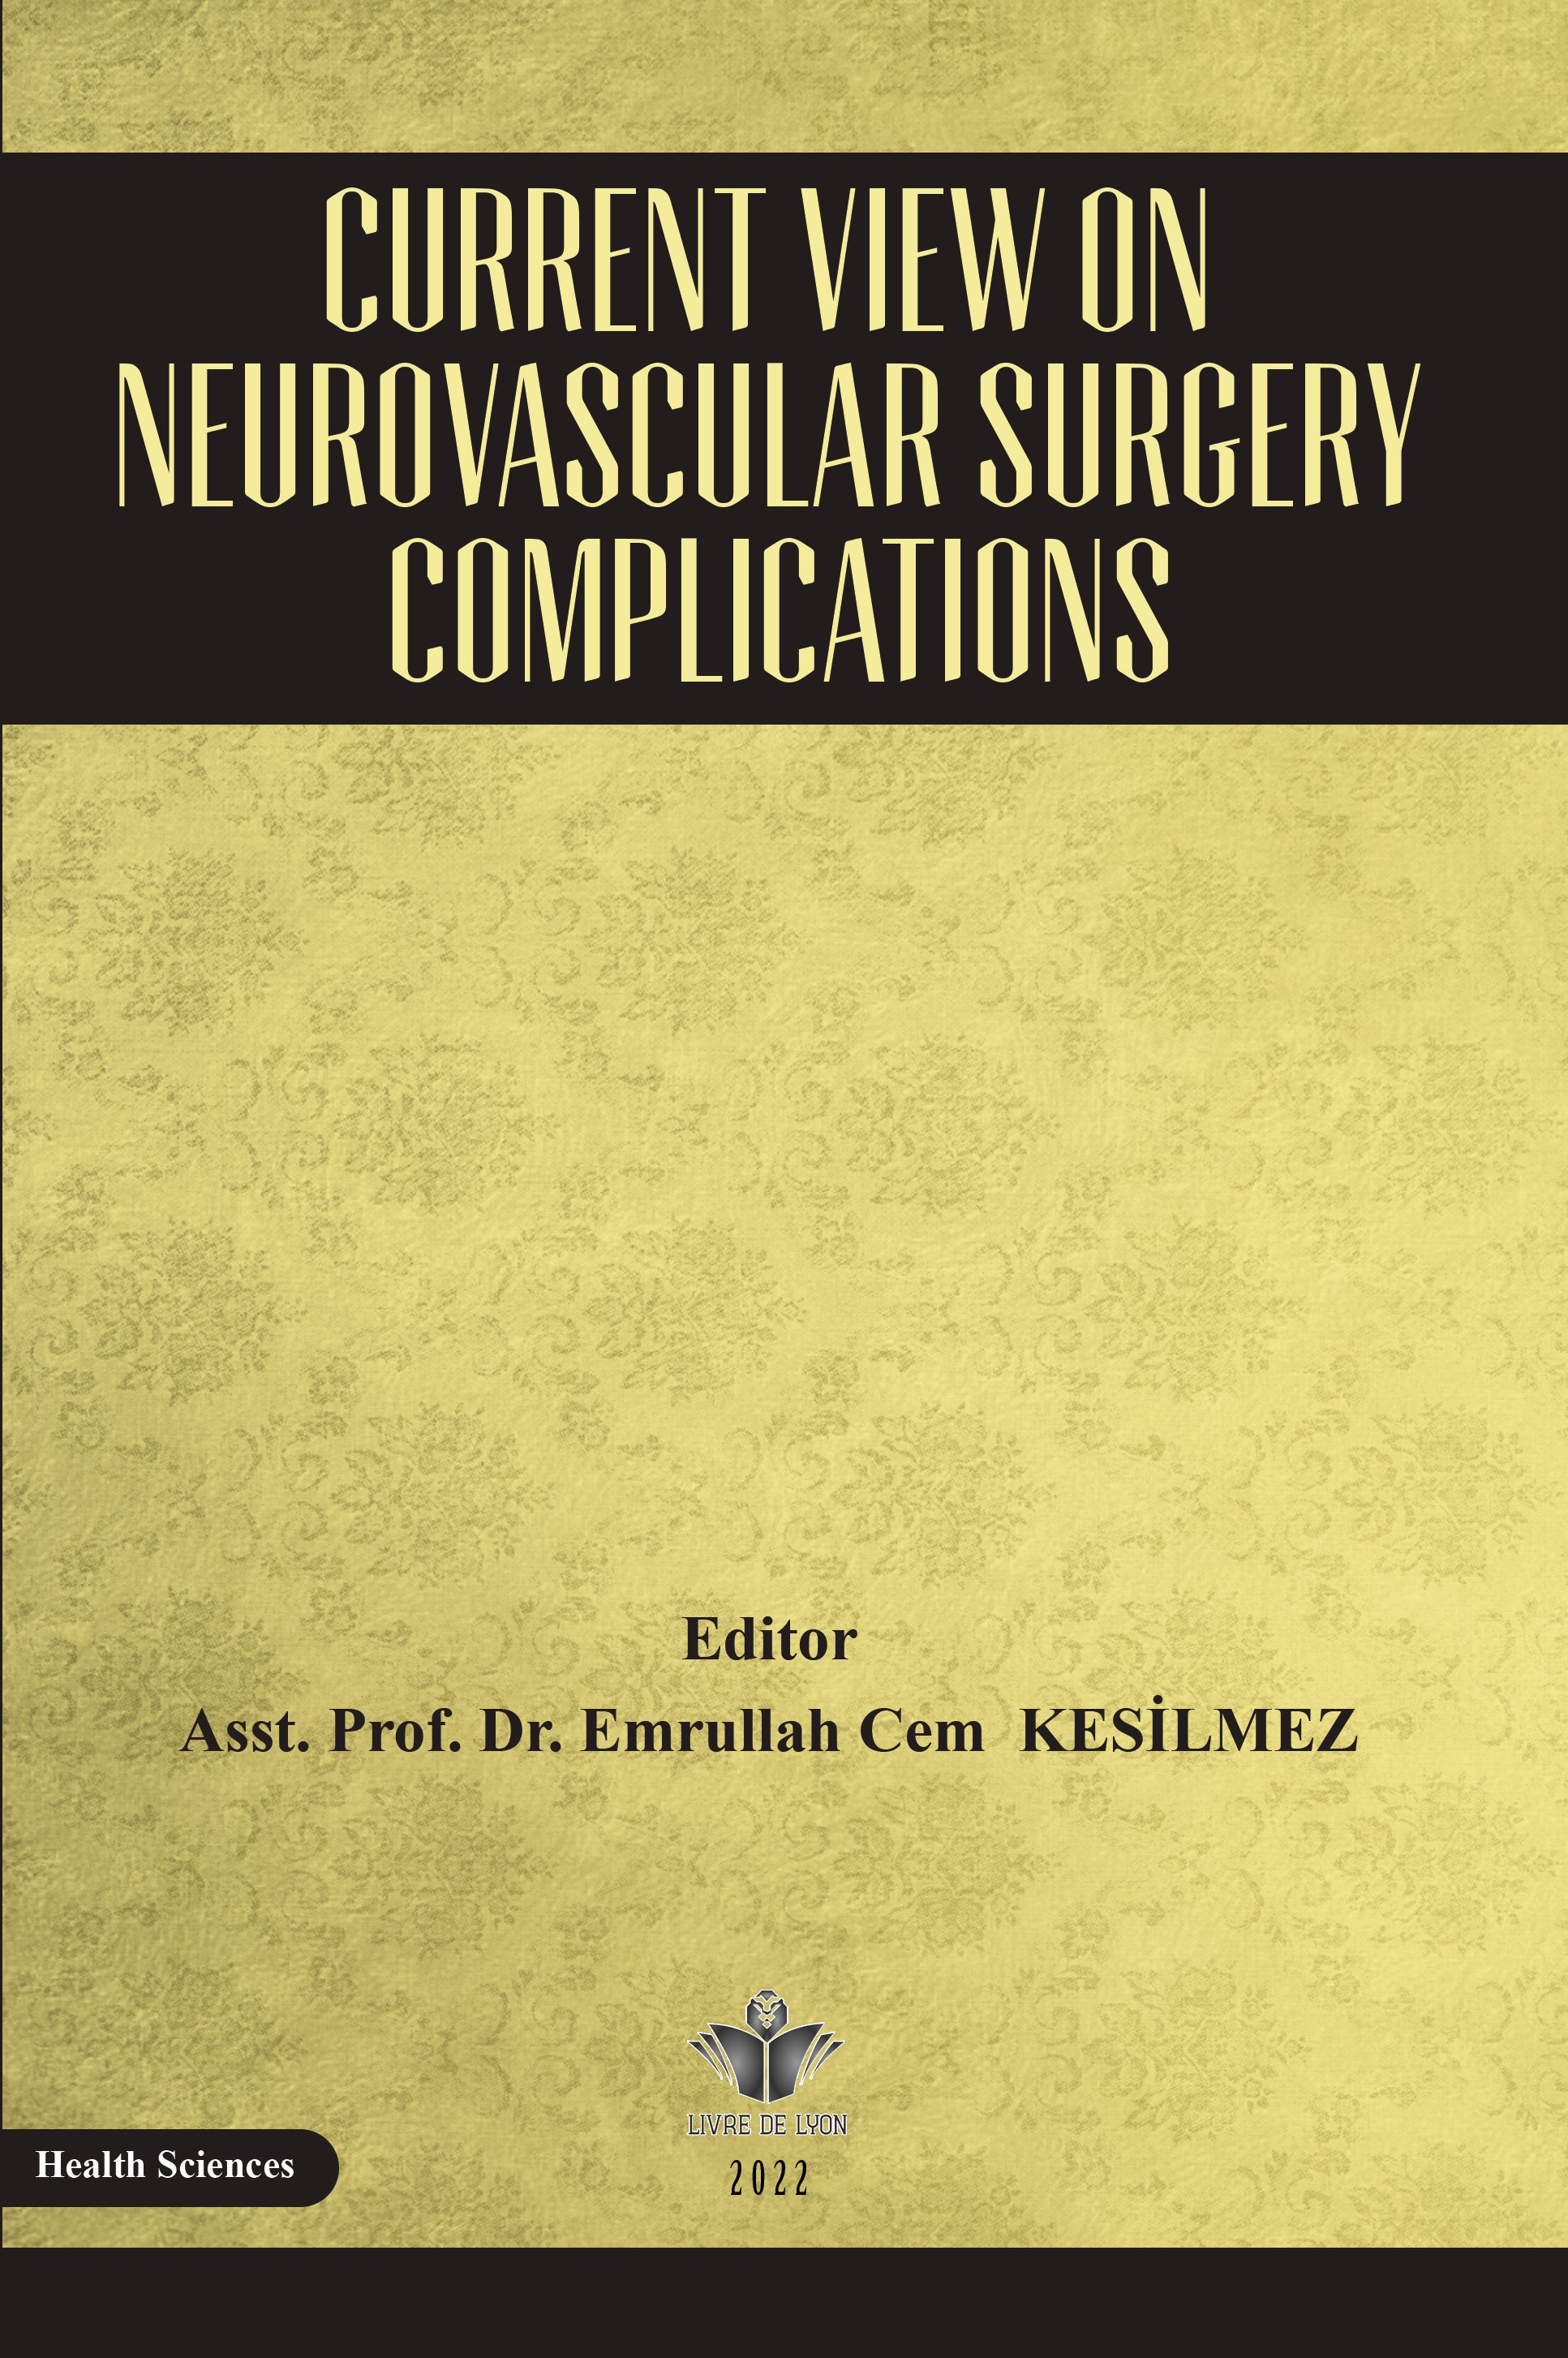 Current View on Neurovascular Surgery Complications